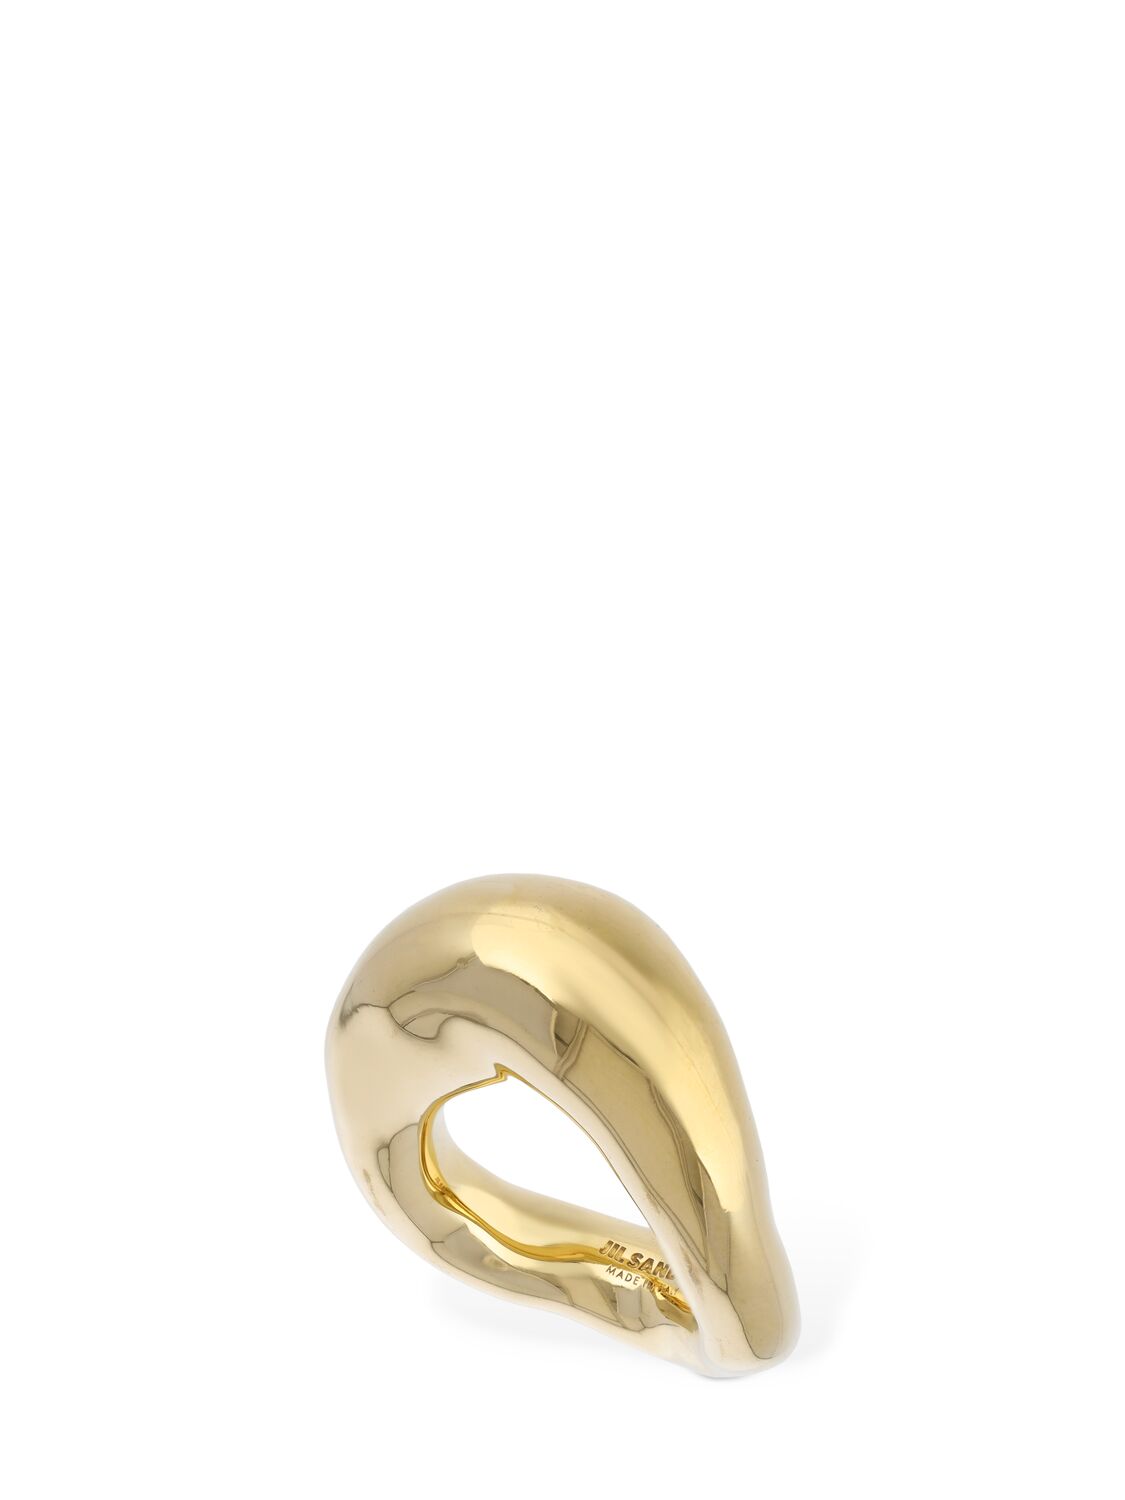 Jil Sander Bw5 1 Thick Ring In Gold